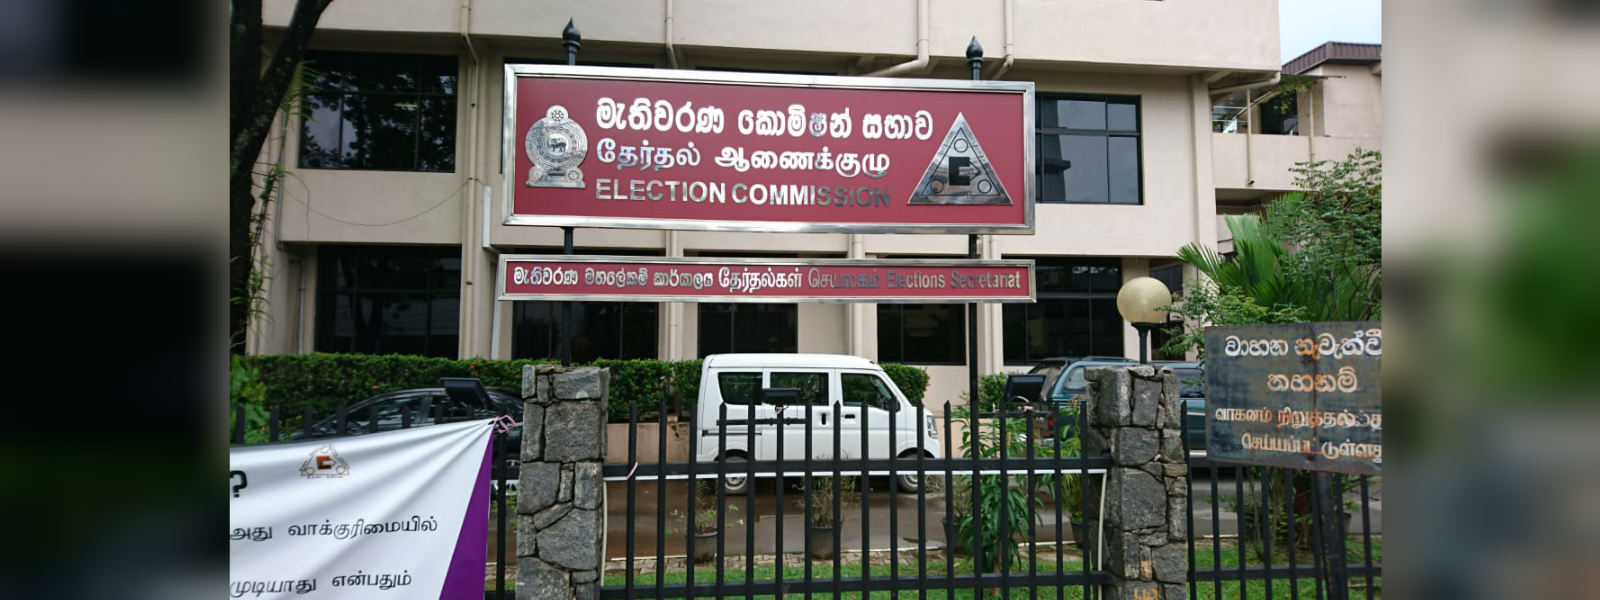 673 complaints on upcoming Presidential Election